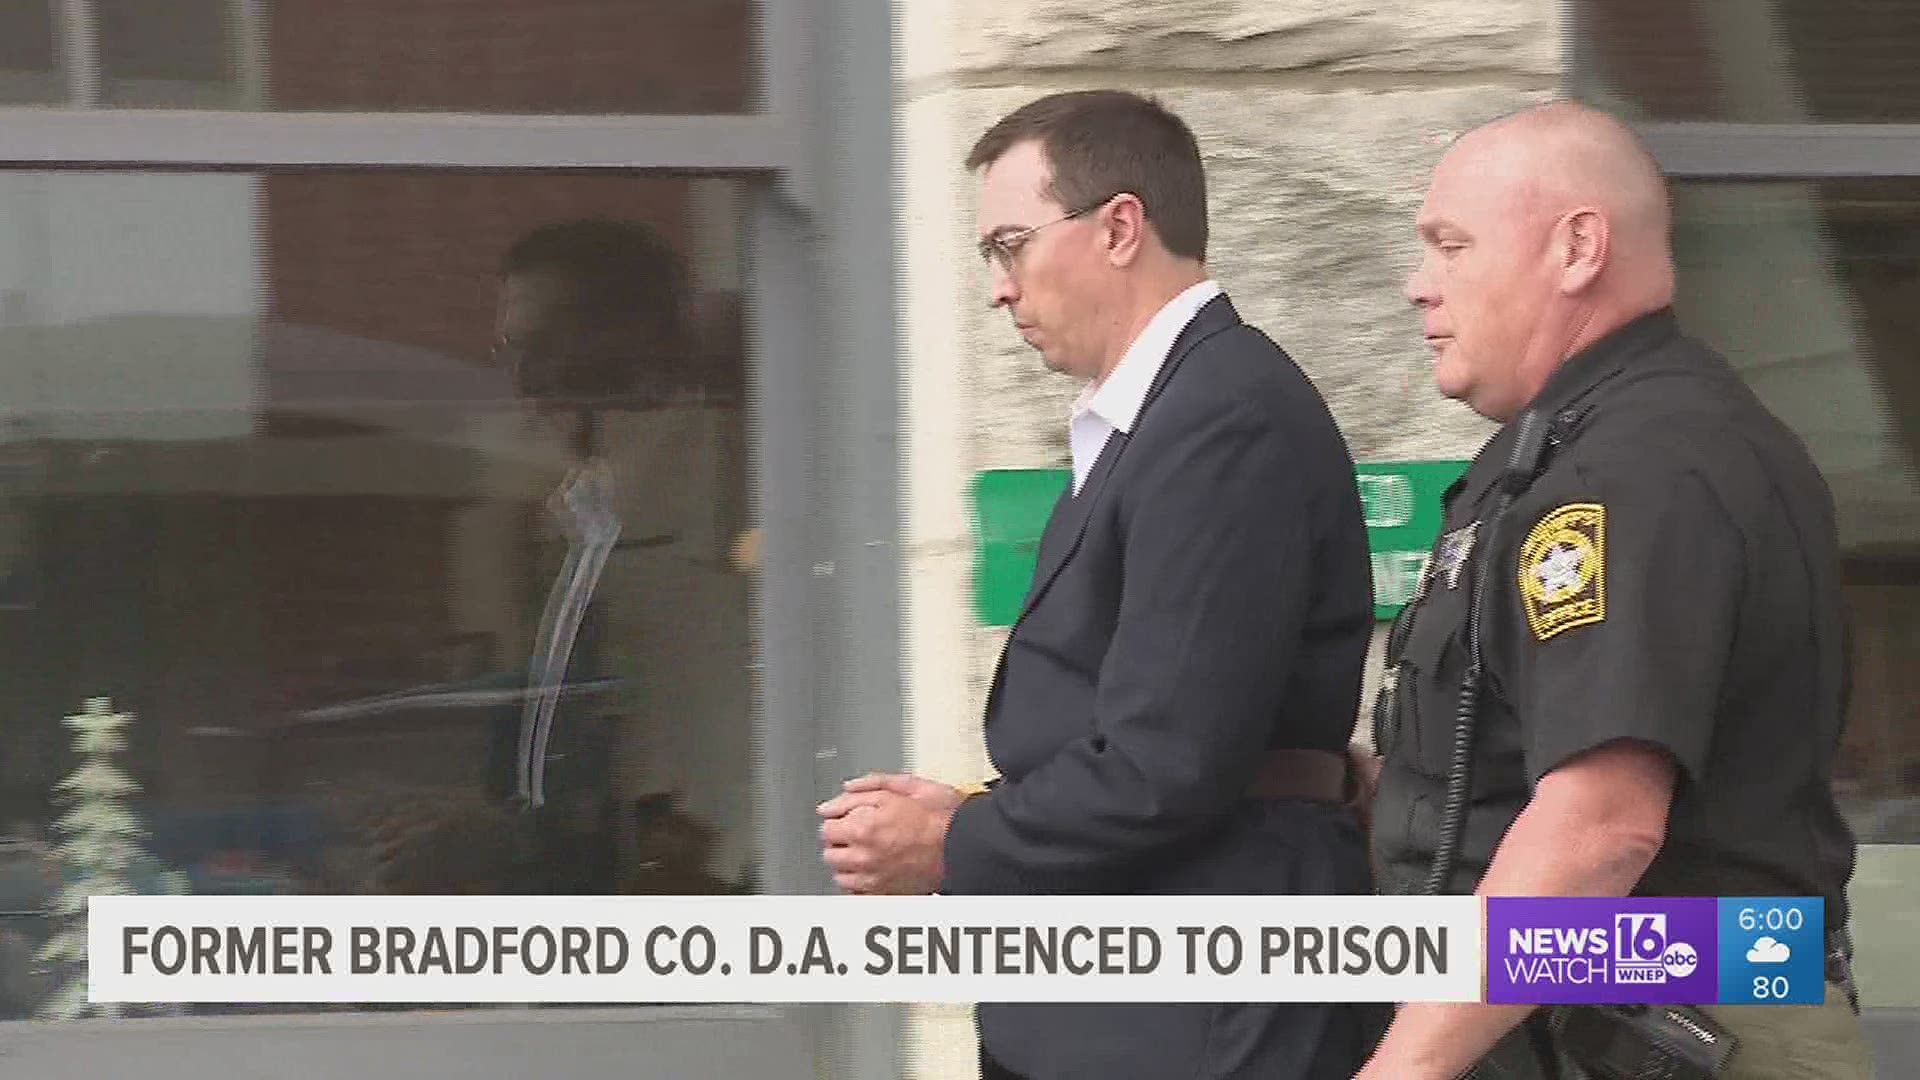 Former Bradford County DA Chad Salsman was sentenced on Friday. Newswatch 16's Nikki Krize spoke with one of the women who helped put him behind bars.